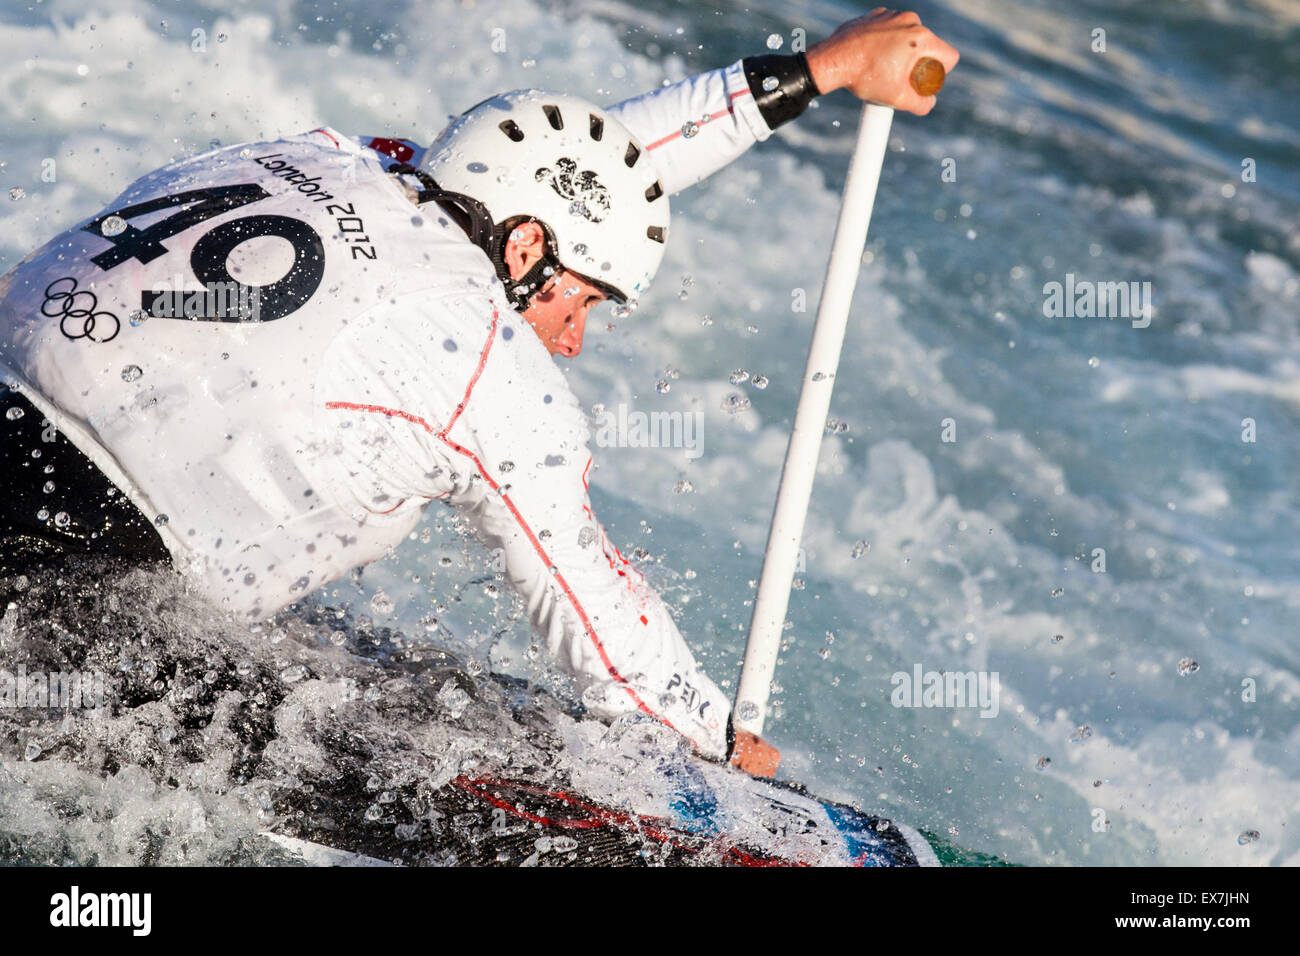 LEE VALLEY, ENGLAND - British Open 2013,  Canoe Slalom at Lee Valley White Water Centre on November 3, 2013. Stock Photo